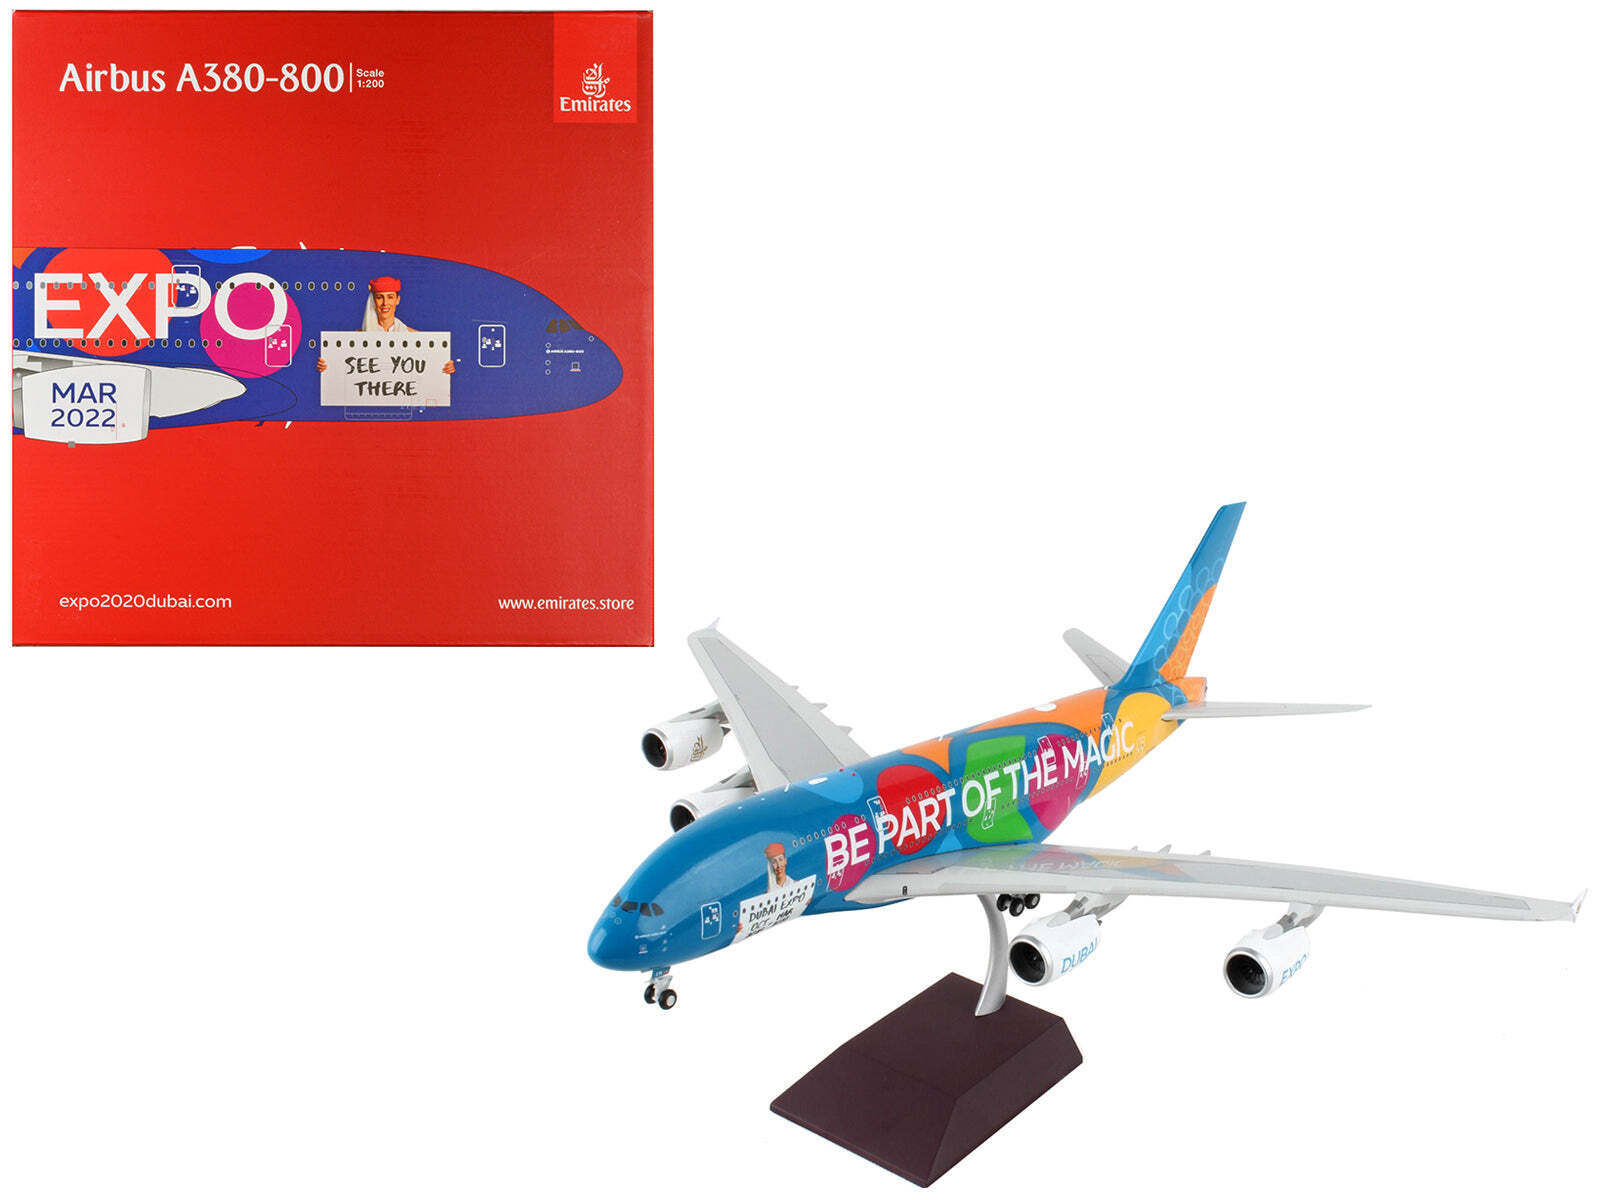 Airbus A380-800 Commercial Emirates Airlines - 1/200 Diecast Model Airplane